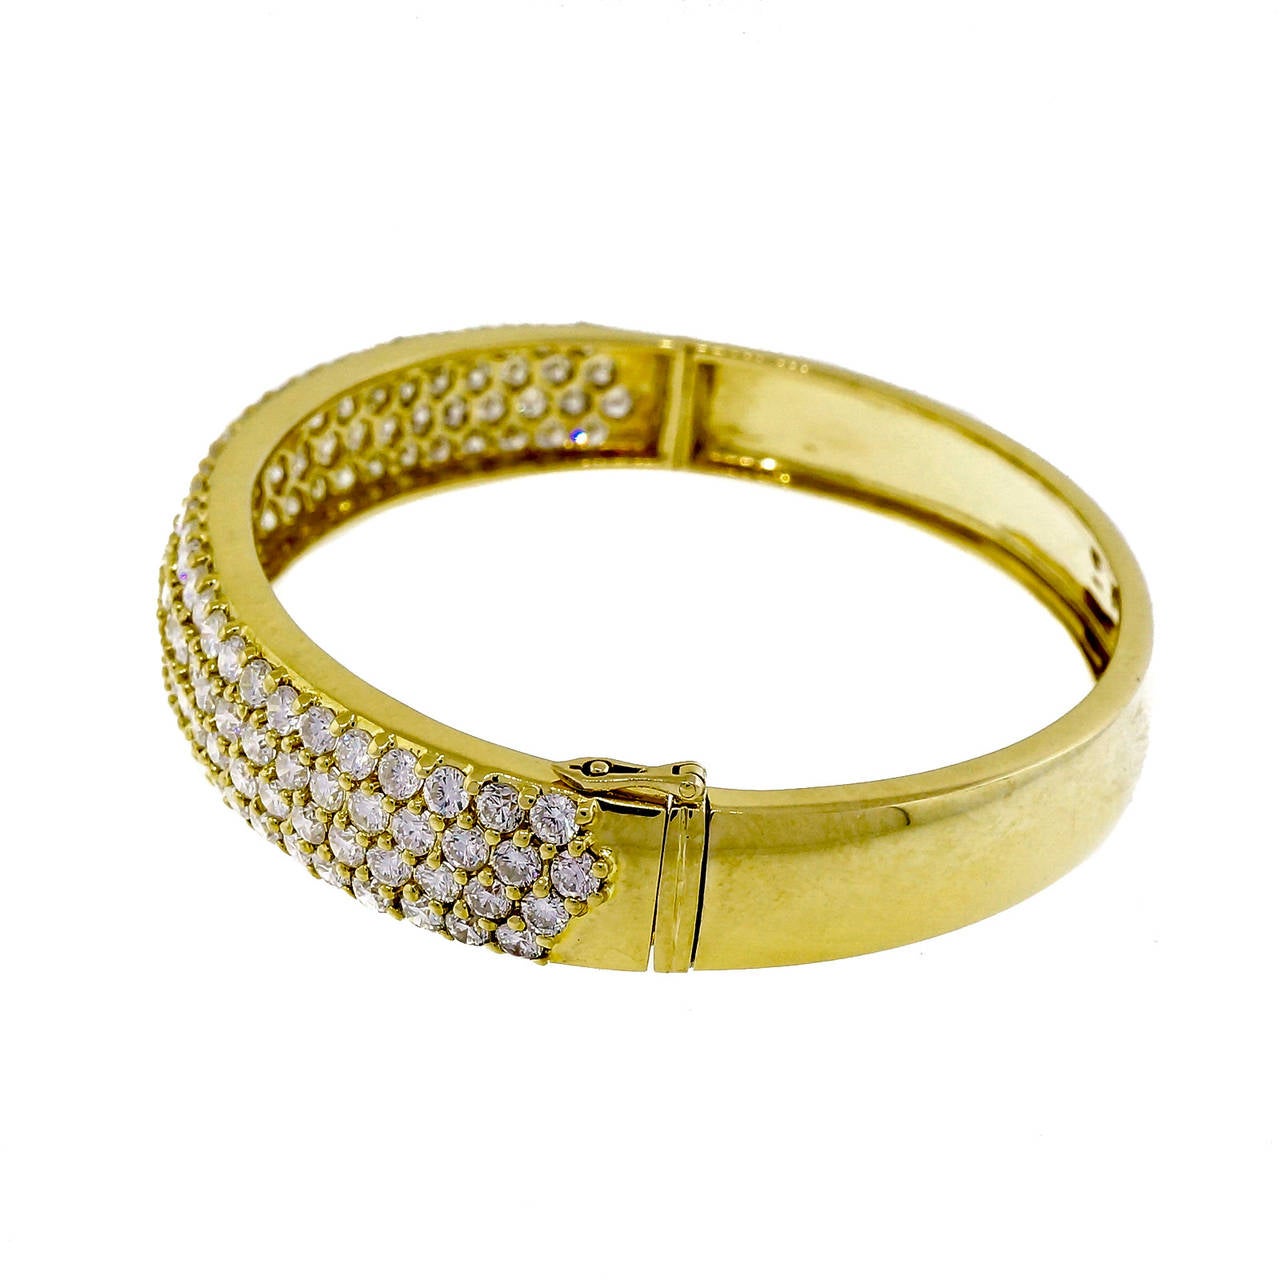 Bold and beautiful 1960’s high grade solid 18k gold bracelet bangle style with bright sparkly full cut diamonds.

126 full cut diamonds, approx. total weight 4.00cts, G-H, VS2 – SI1
18k yellow gold
30.4 grams
Tested: 18k
Stamped: 750
Width at